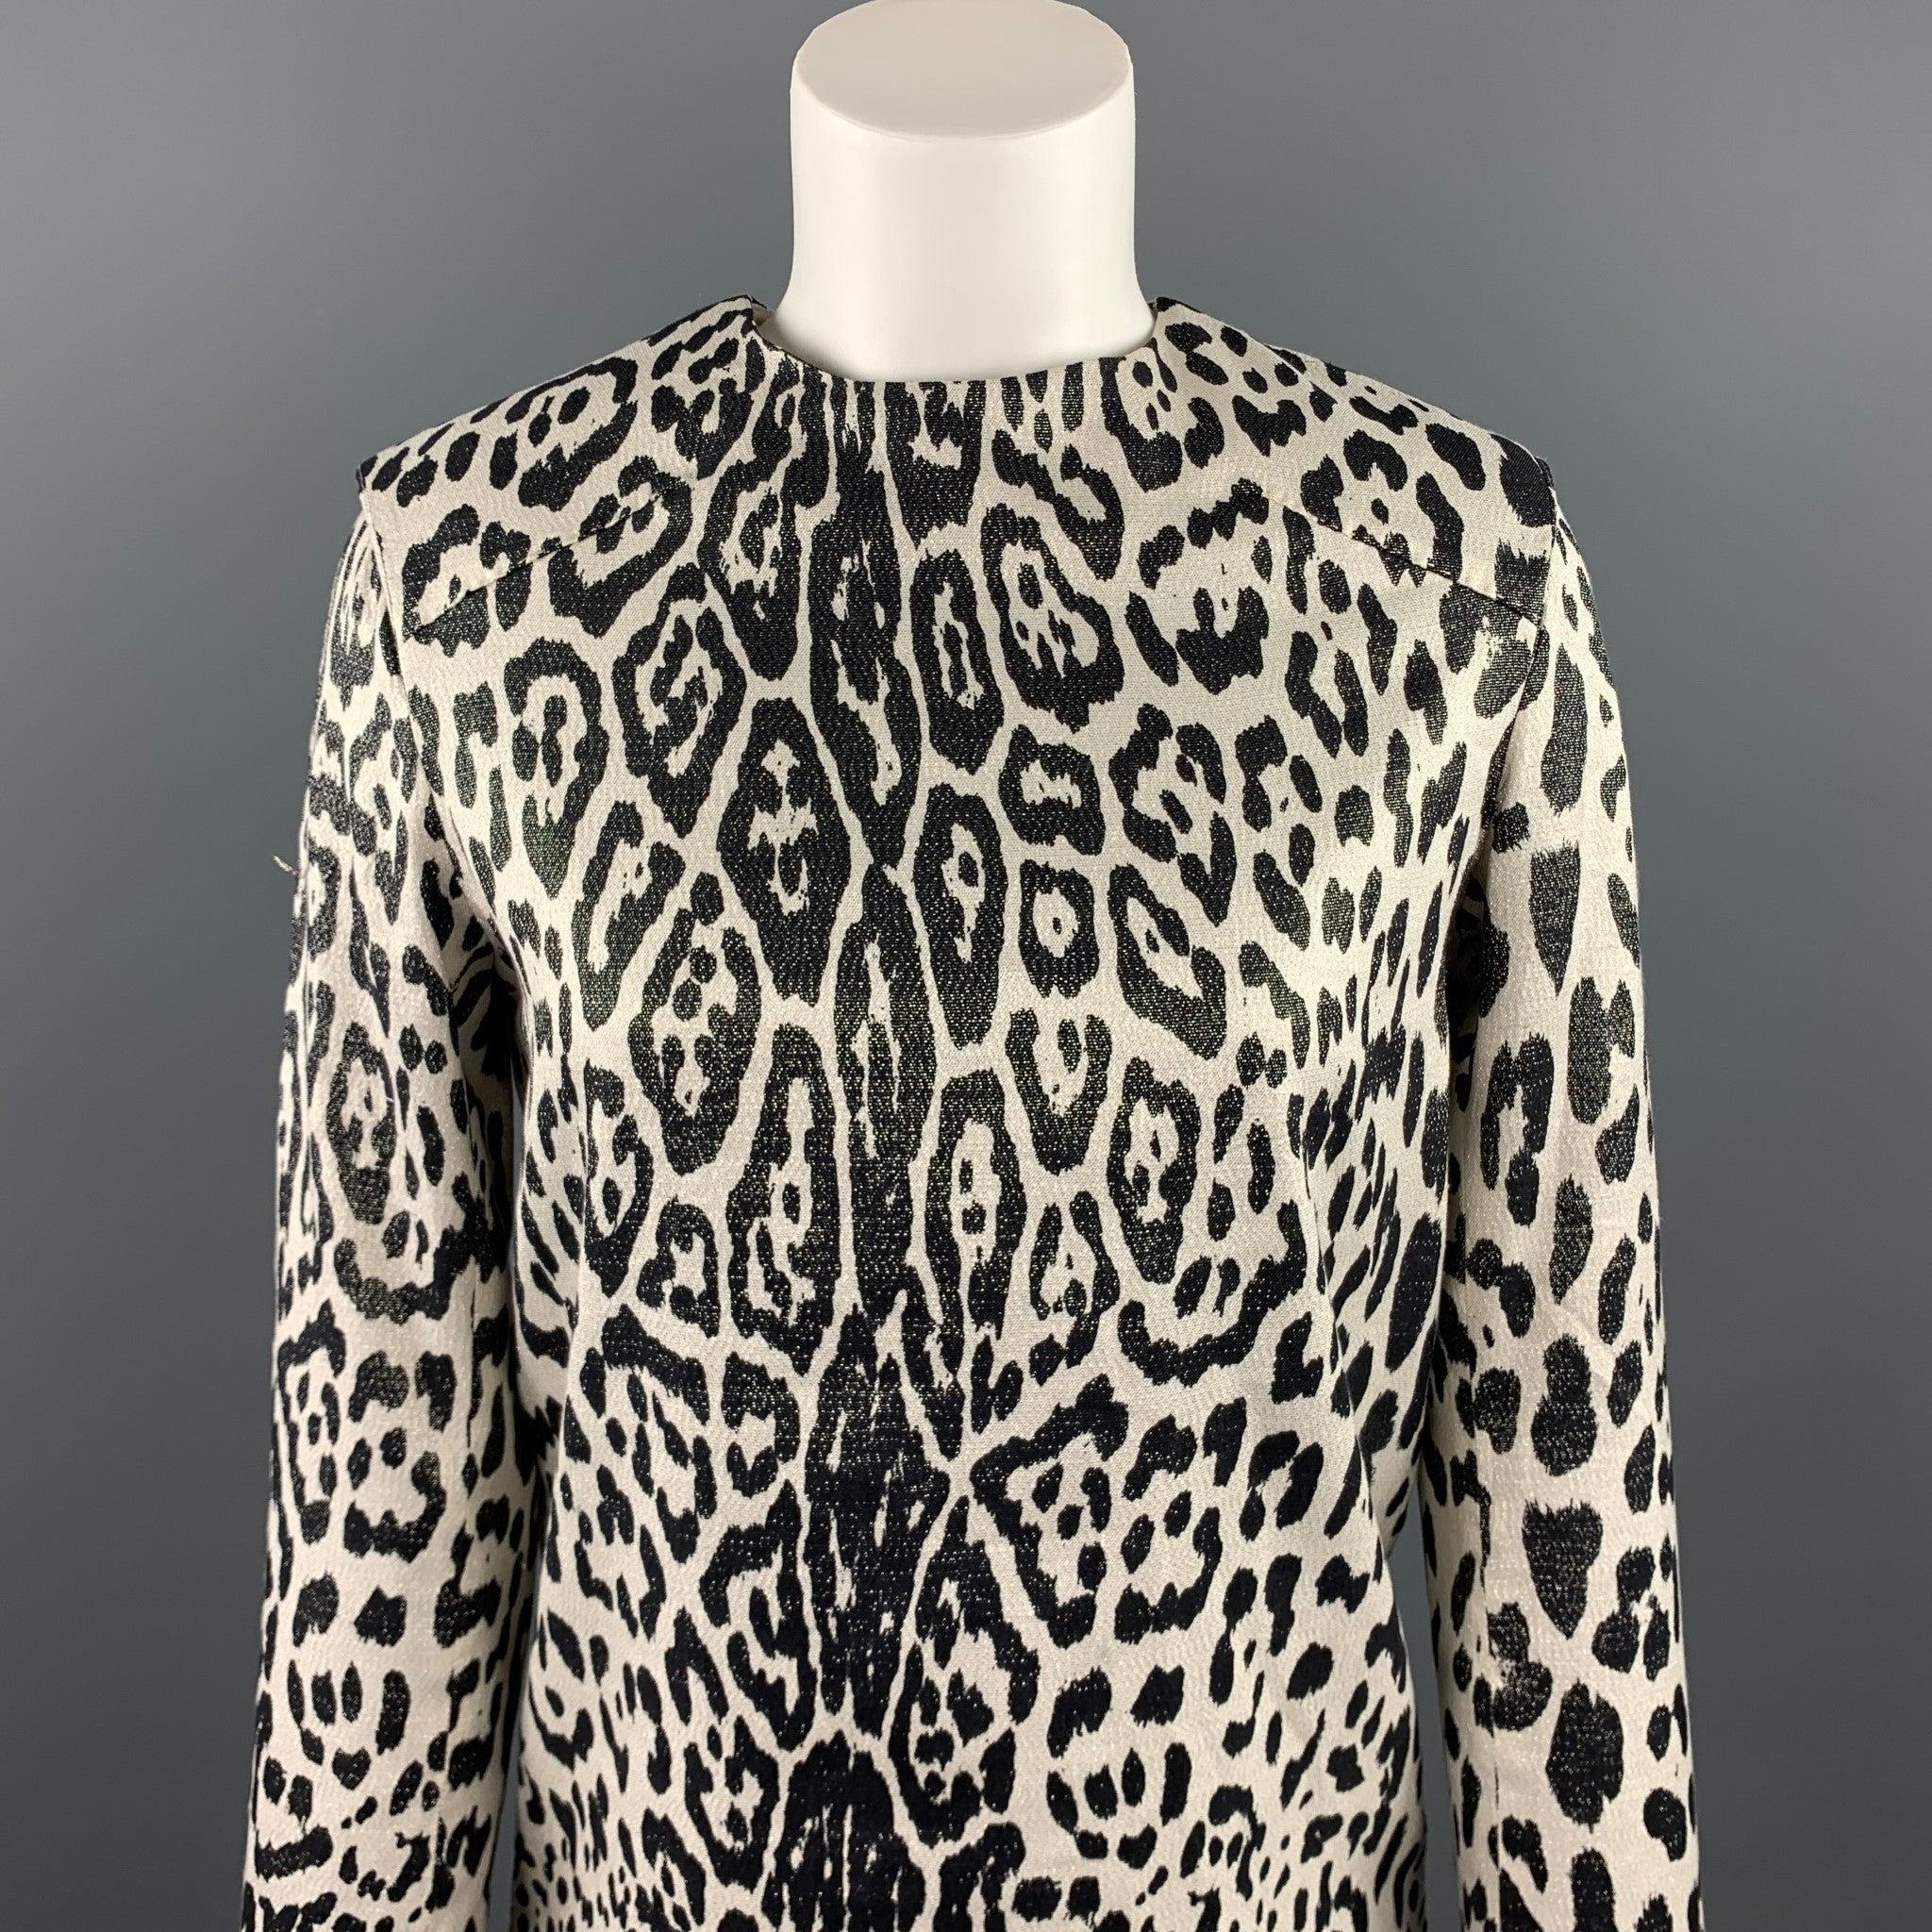 HAIDER ACKERMANN blouse comes in a silver & black leopard print silk blend featuring stitching details and back zip up closure.Excellent
Pre-Owned Condition. 

Marked:   34 

Measurements: 
 
Shoulder: 16 inches 
Bust: 36 inches 
Sleeve: 26.5 inches